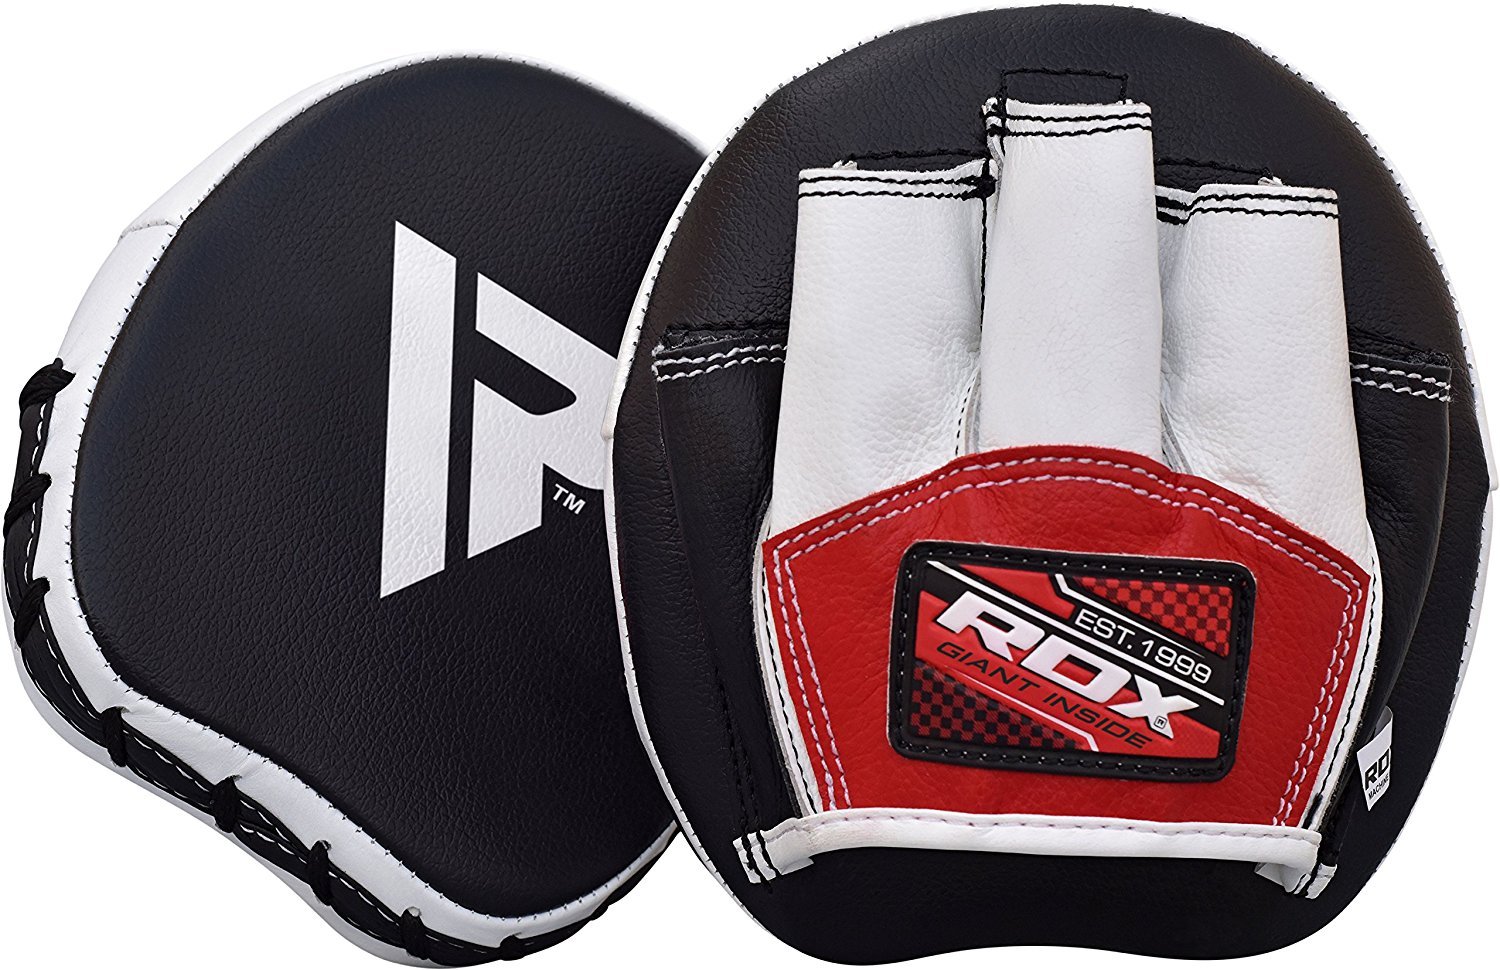 Boxing Pads Focus Mitts | Curved Hook and Jab Target Hand Pads | Great for  MMA, Muay Thai, Kickboxing, Martial Arts, Karate Training | Padded